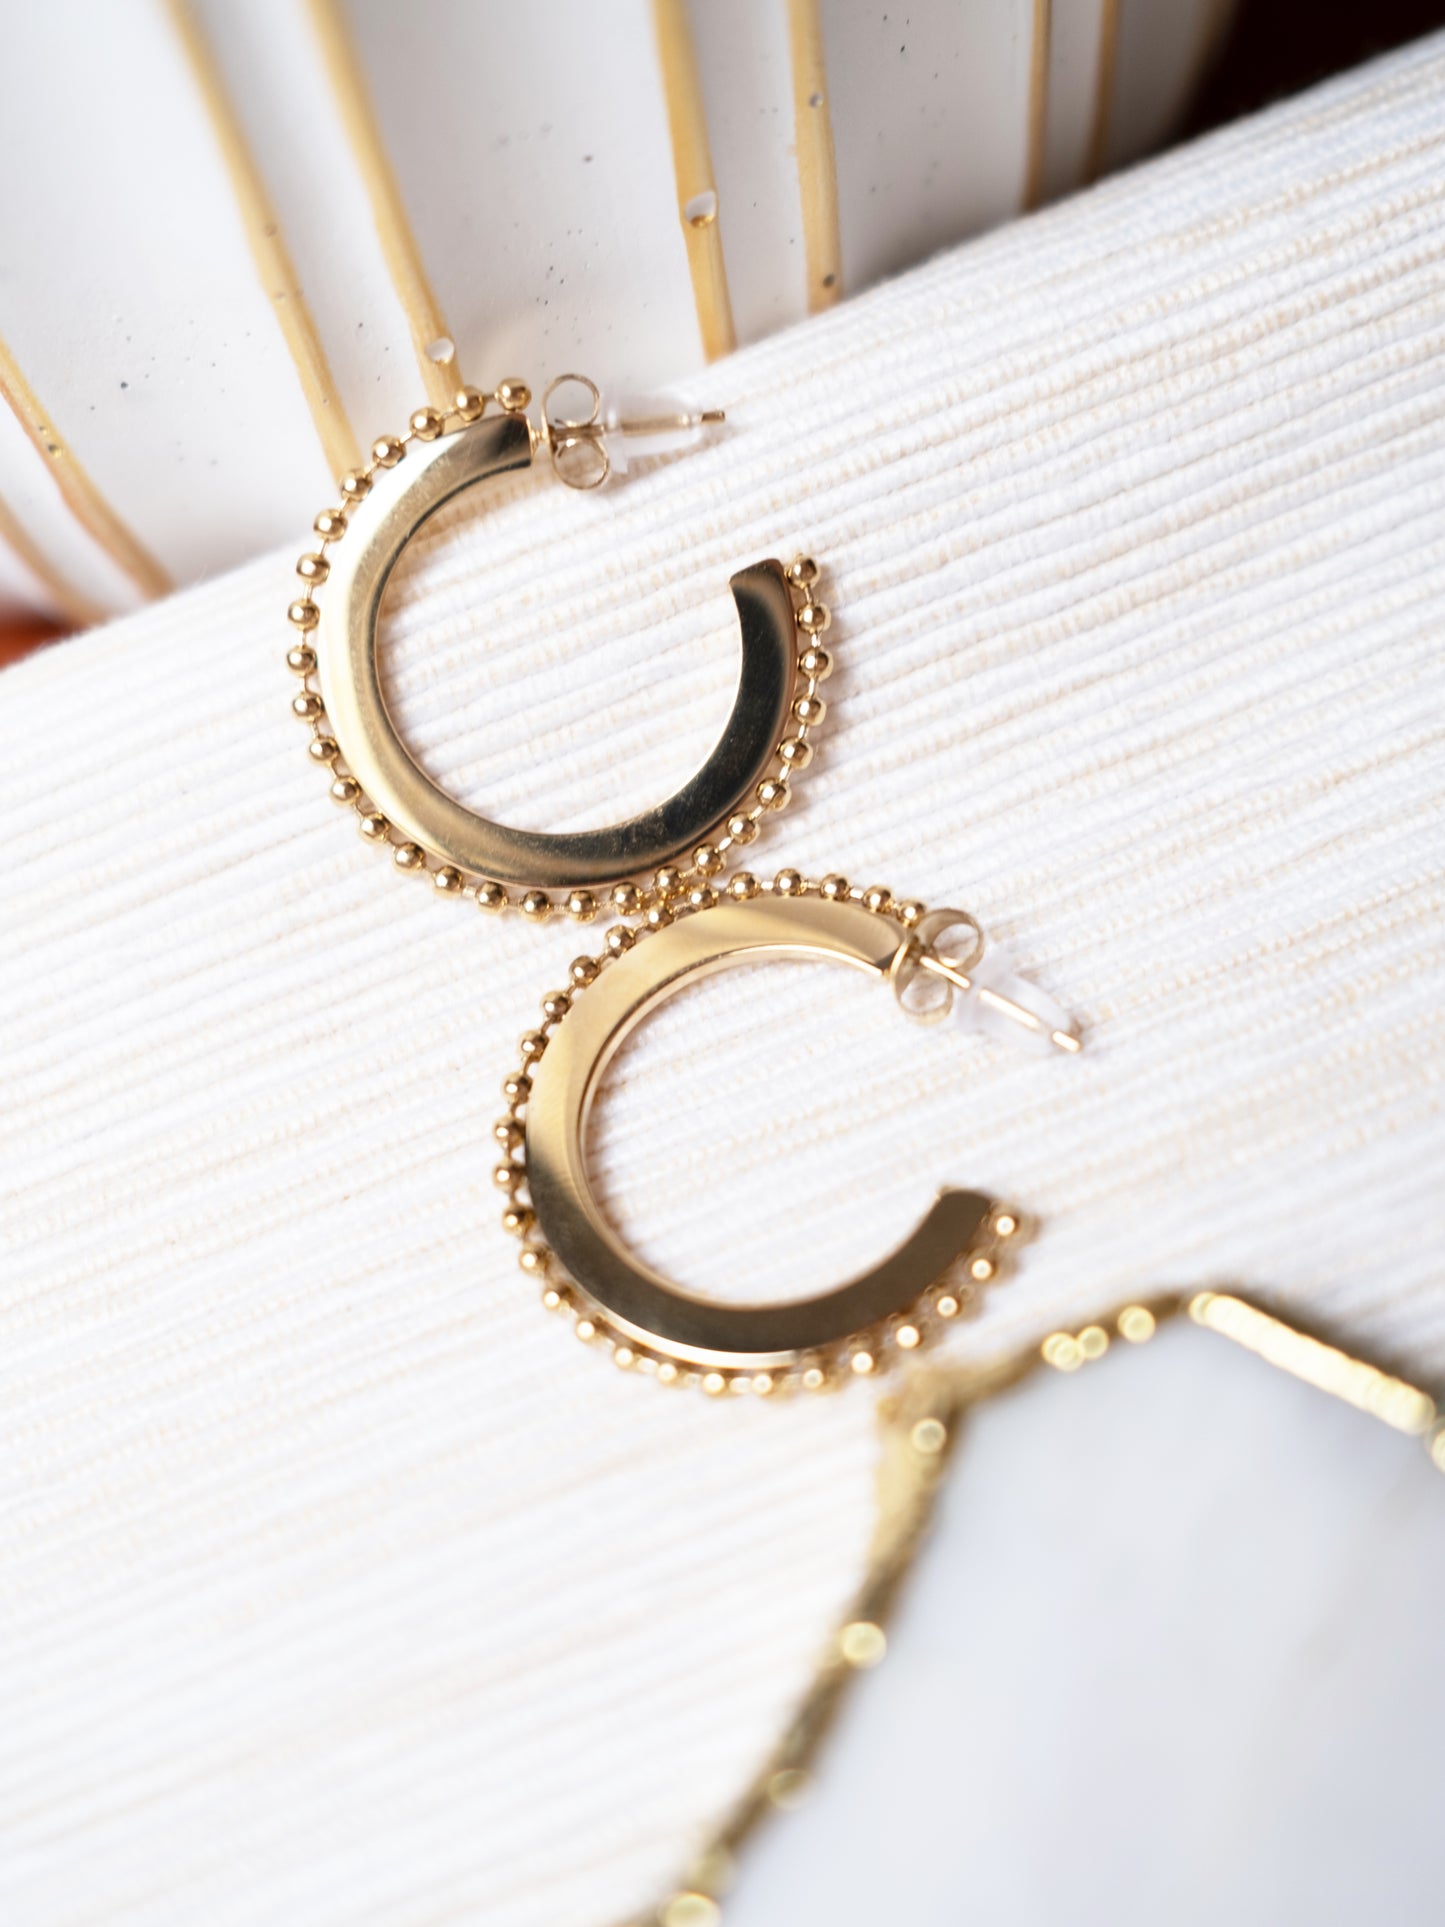 Lined with Purpose Earrings